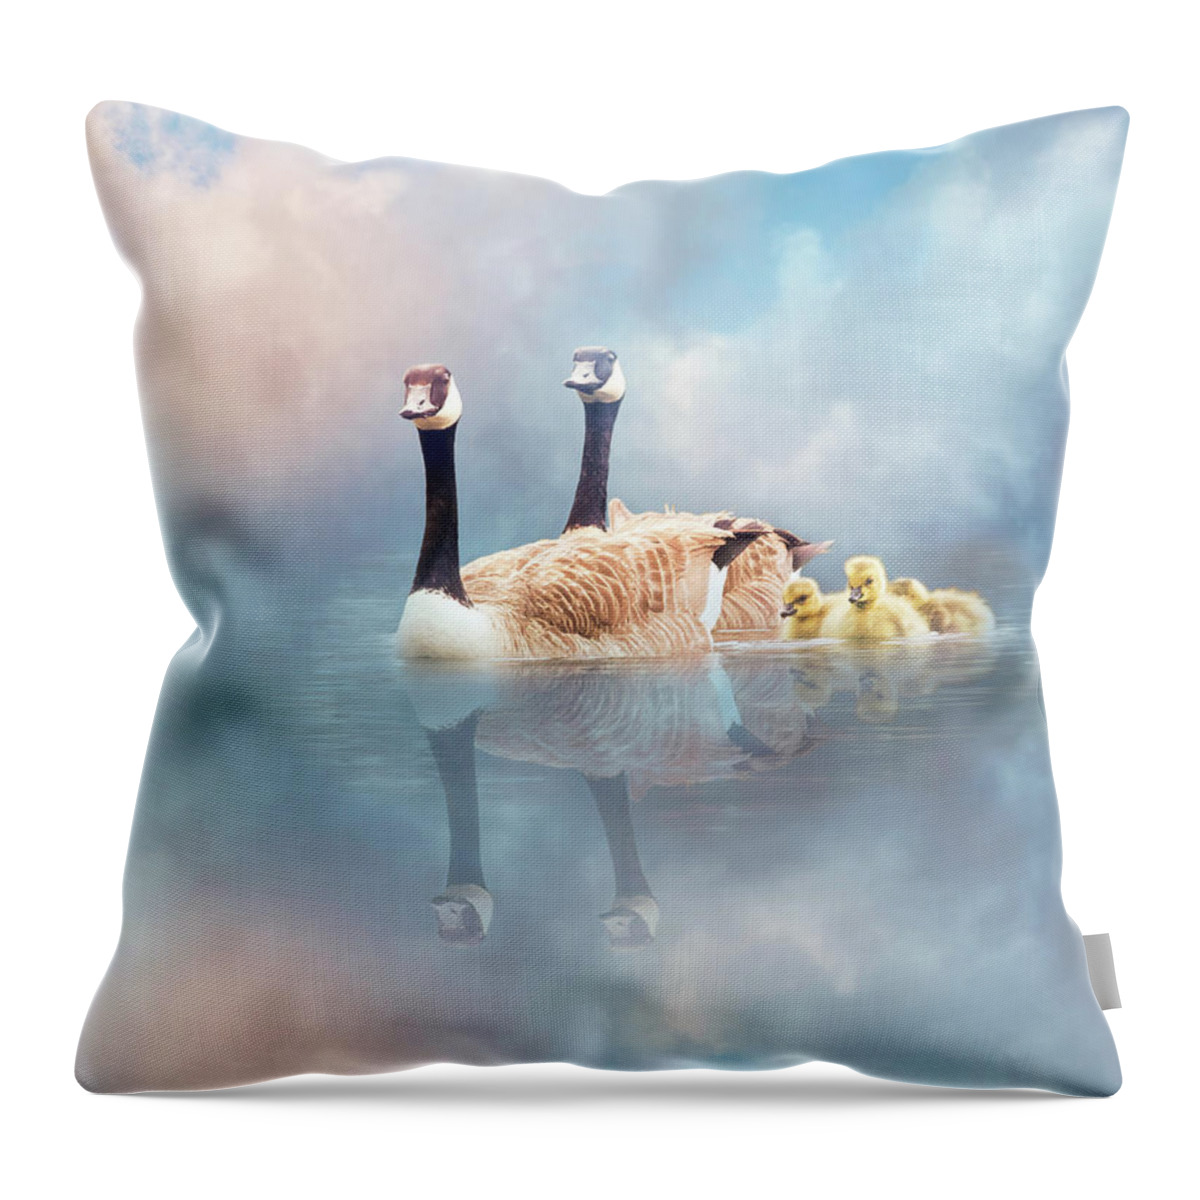 Swan Throw Pillow featuring the digital art Family Cruise by Nicole Wilde